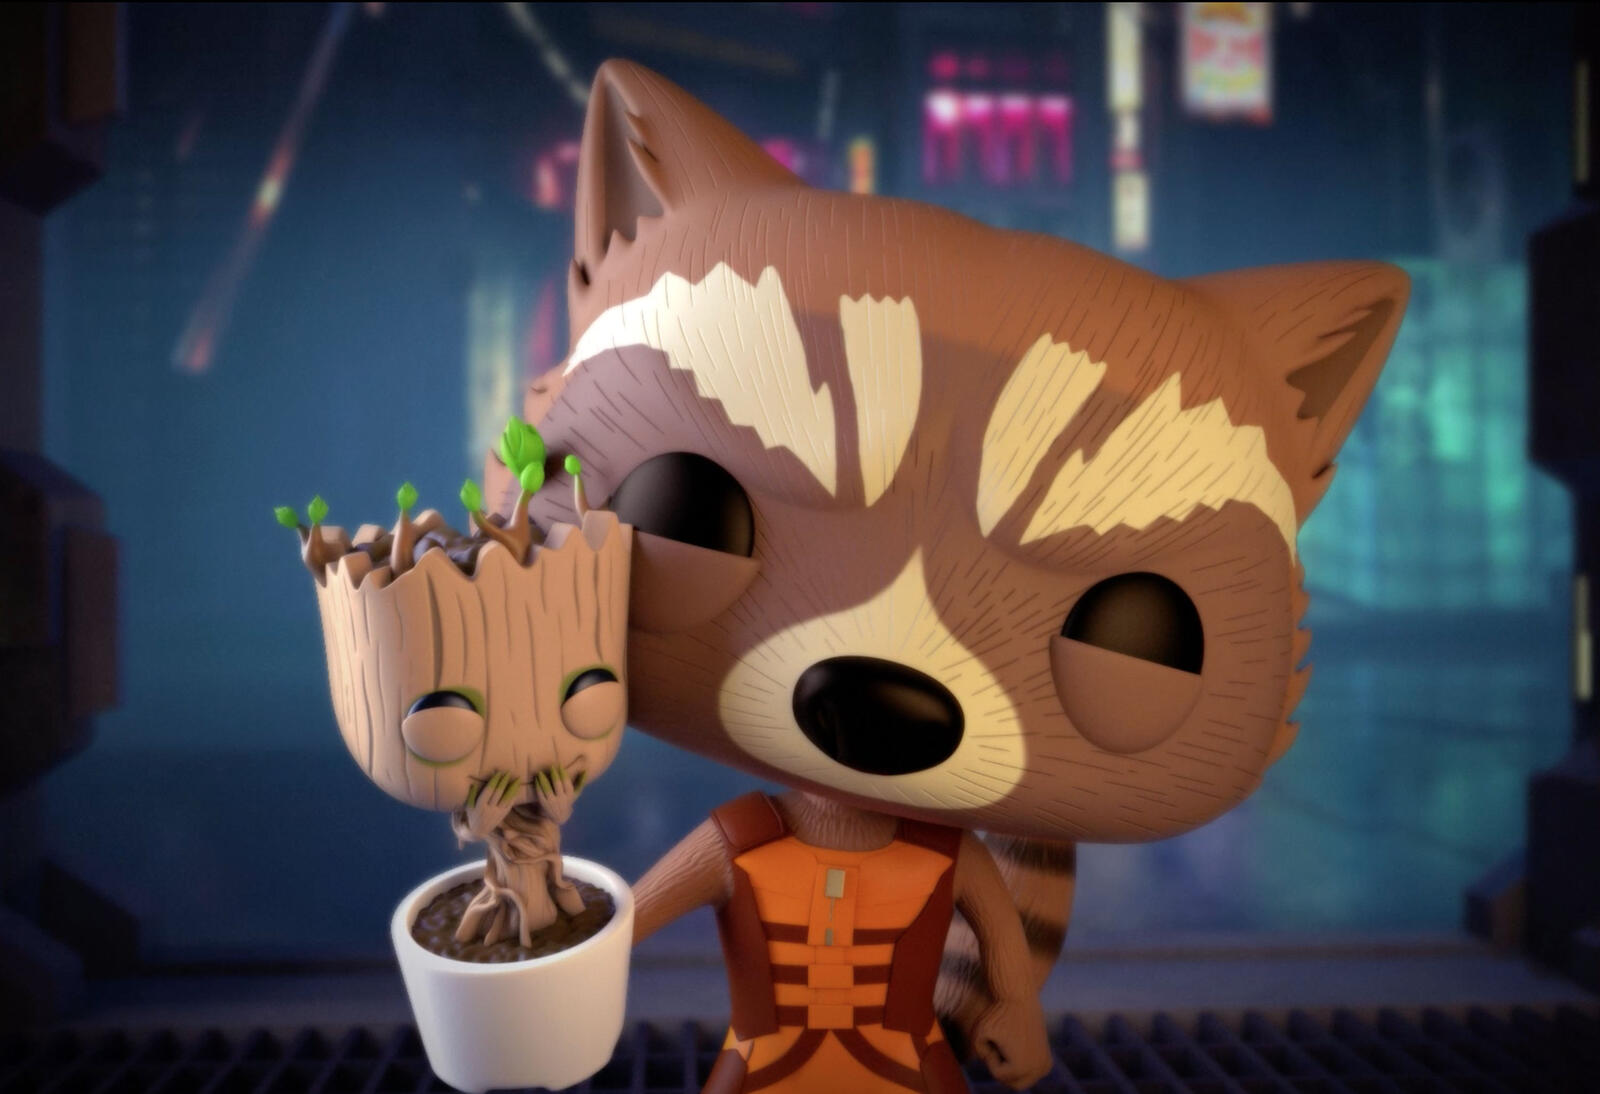 Wallpapers baby Groot guardians of the galaxy vol 2 movies on the desktop